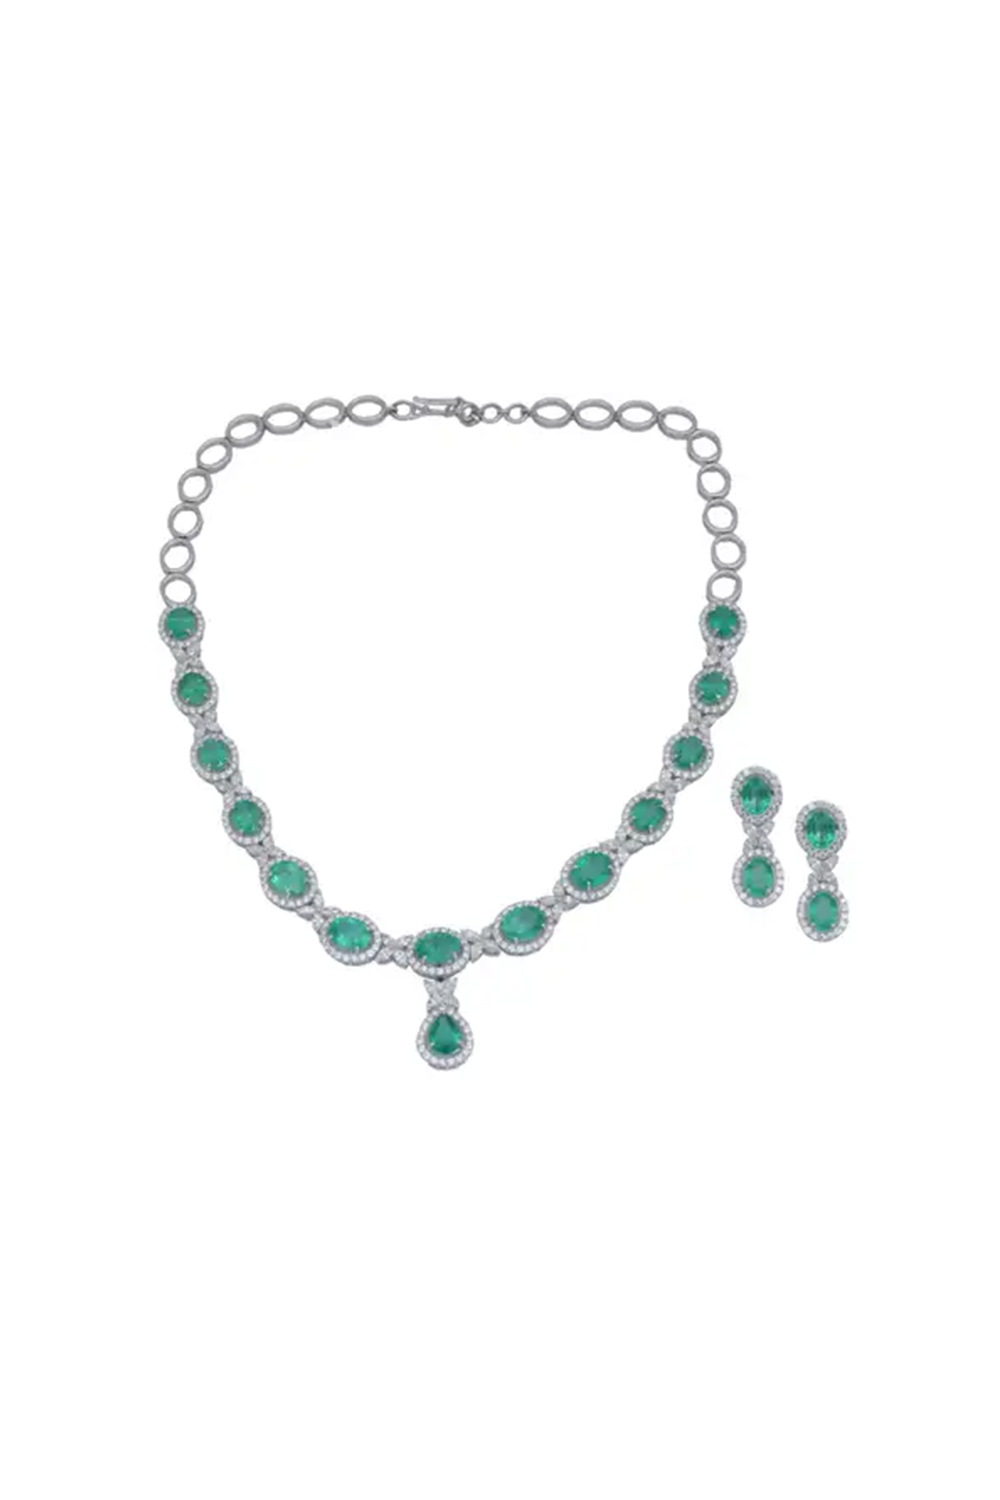 Natural Diamond 11.29 Carats and Zambian Emeralds 28.17 Carats Necklace in 14k Gold